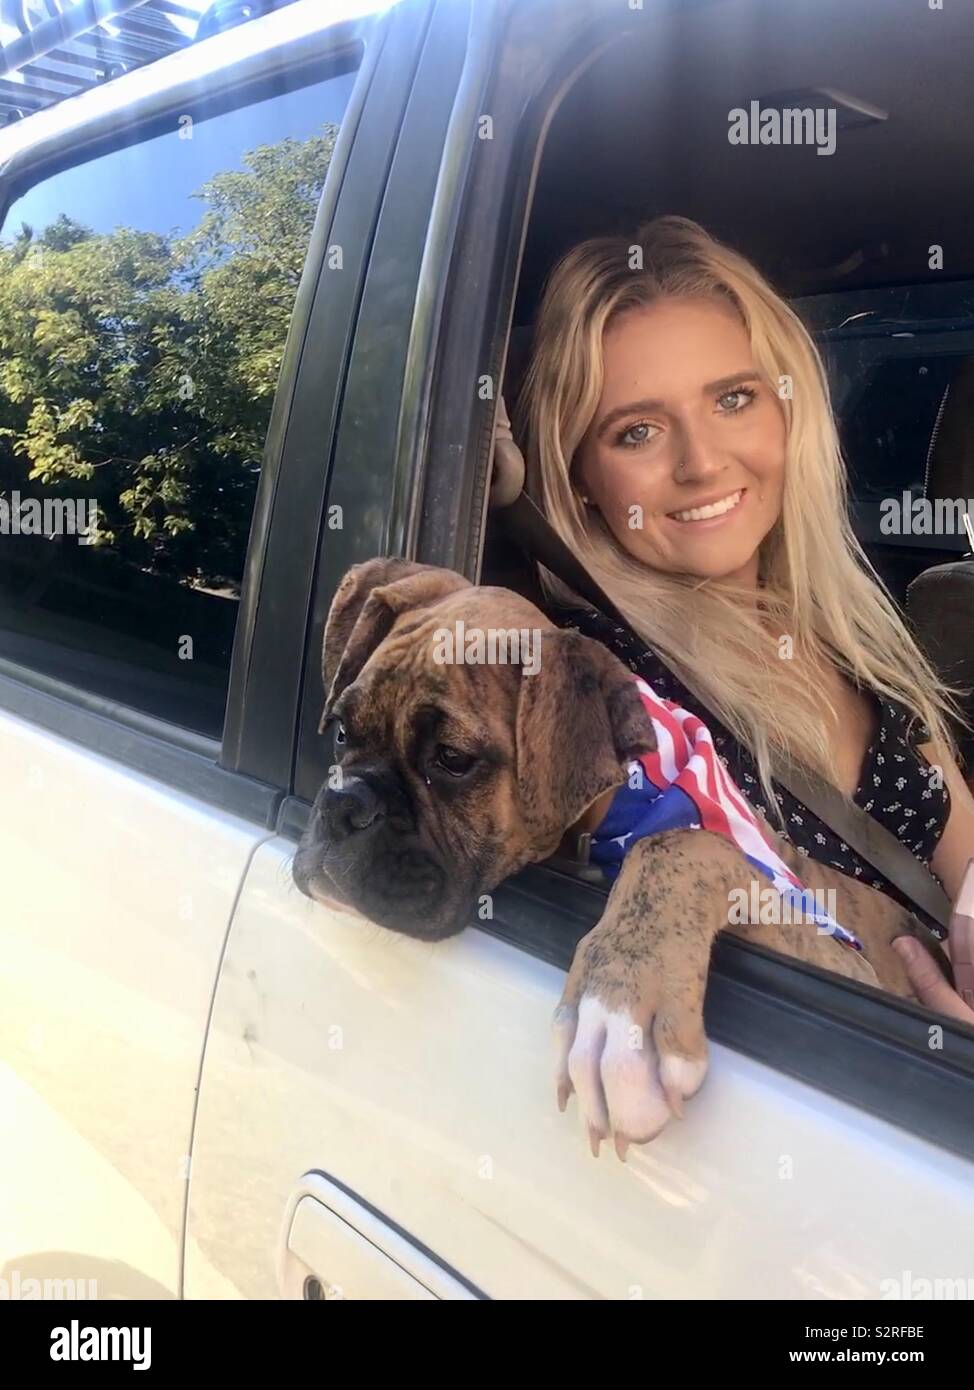 A Dog And A Pretty Girl With Long Blonde Hair Sitting In The Truck